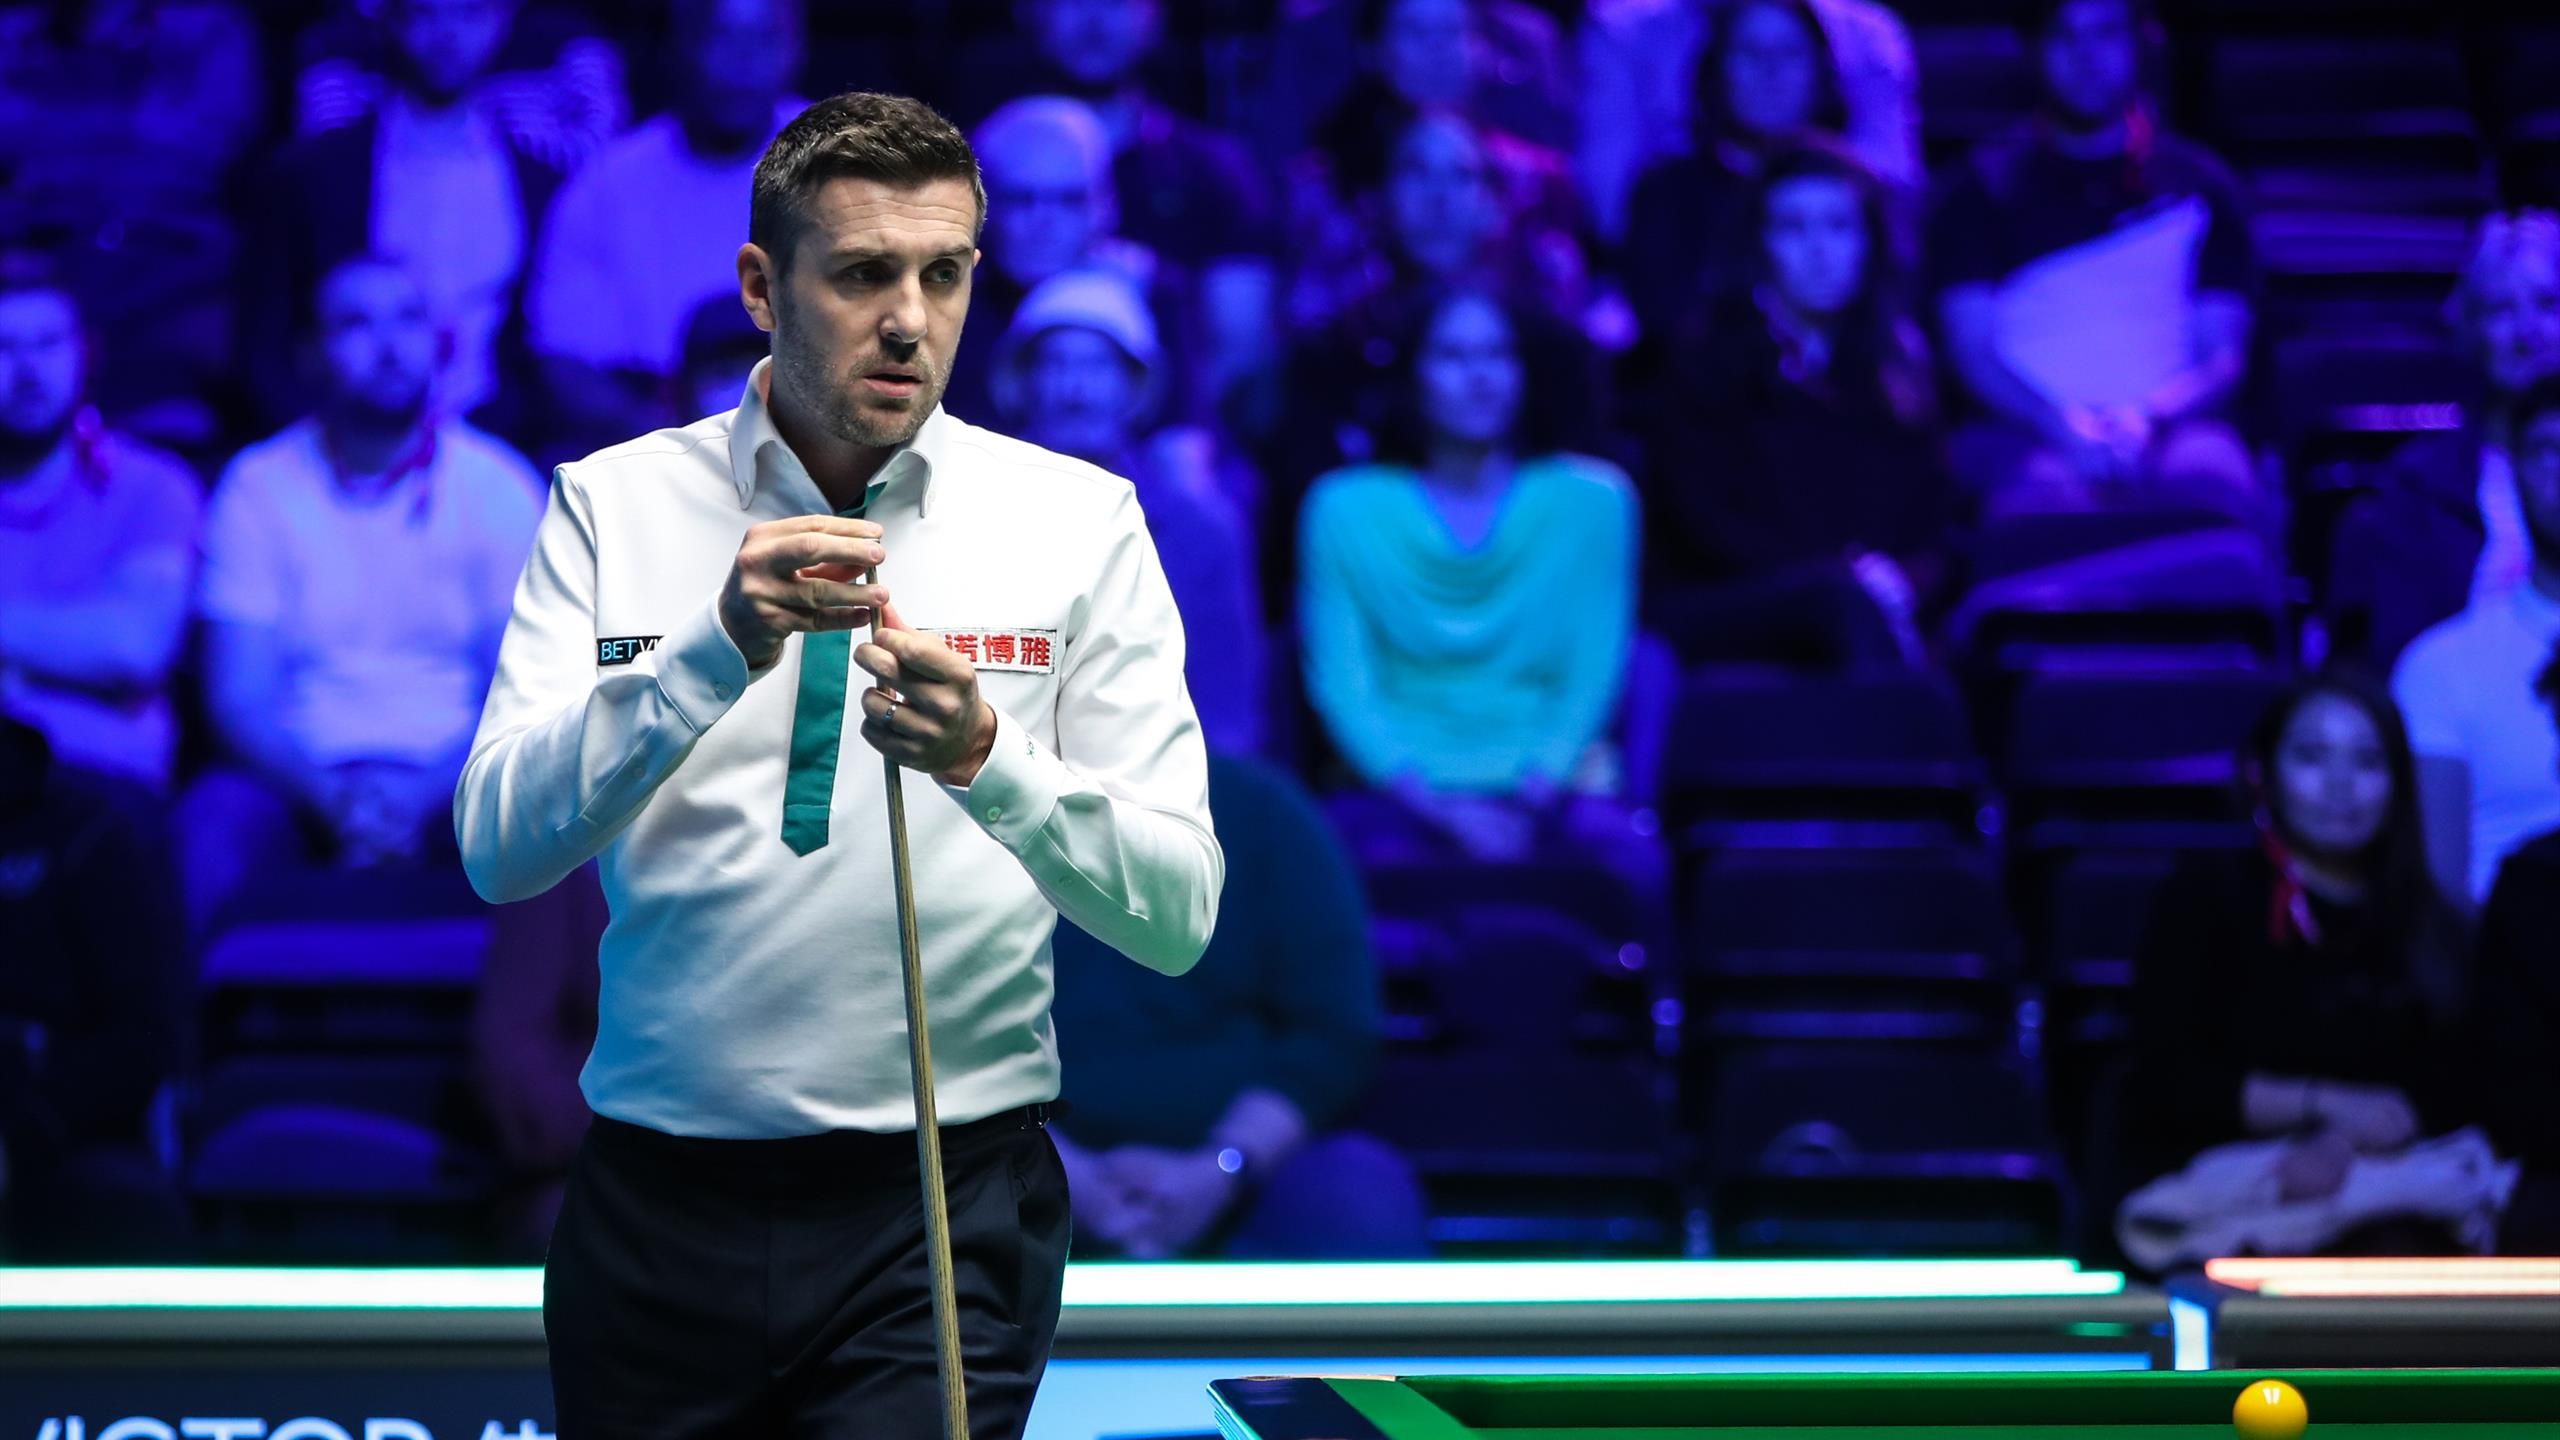 Mark Selby and Rebecca Kenna face Neil Robertson and Mink Nutcharut as Ronnie OSullivan and Reanne Evans fall short